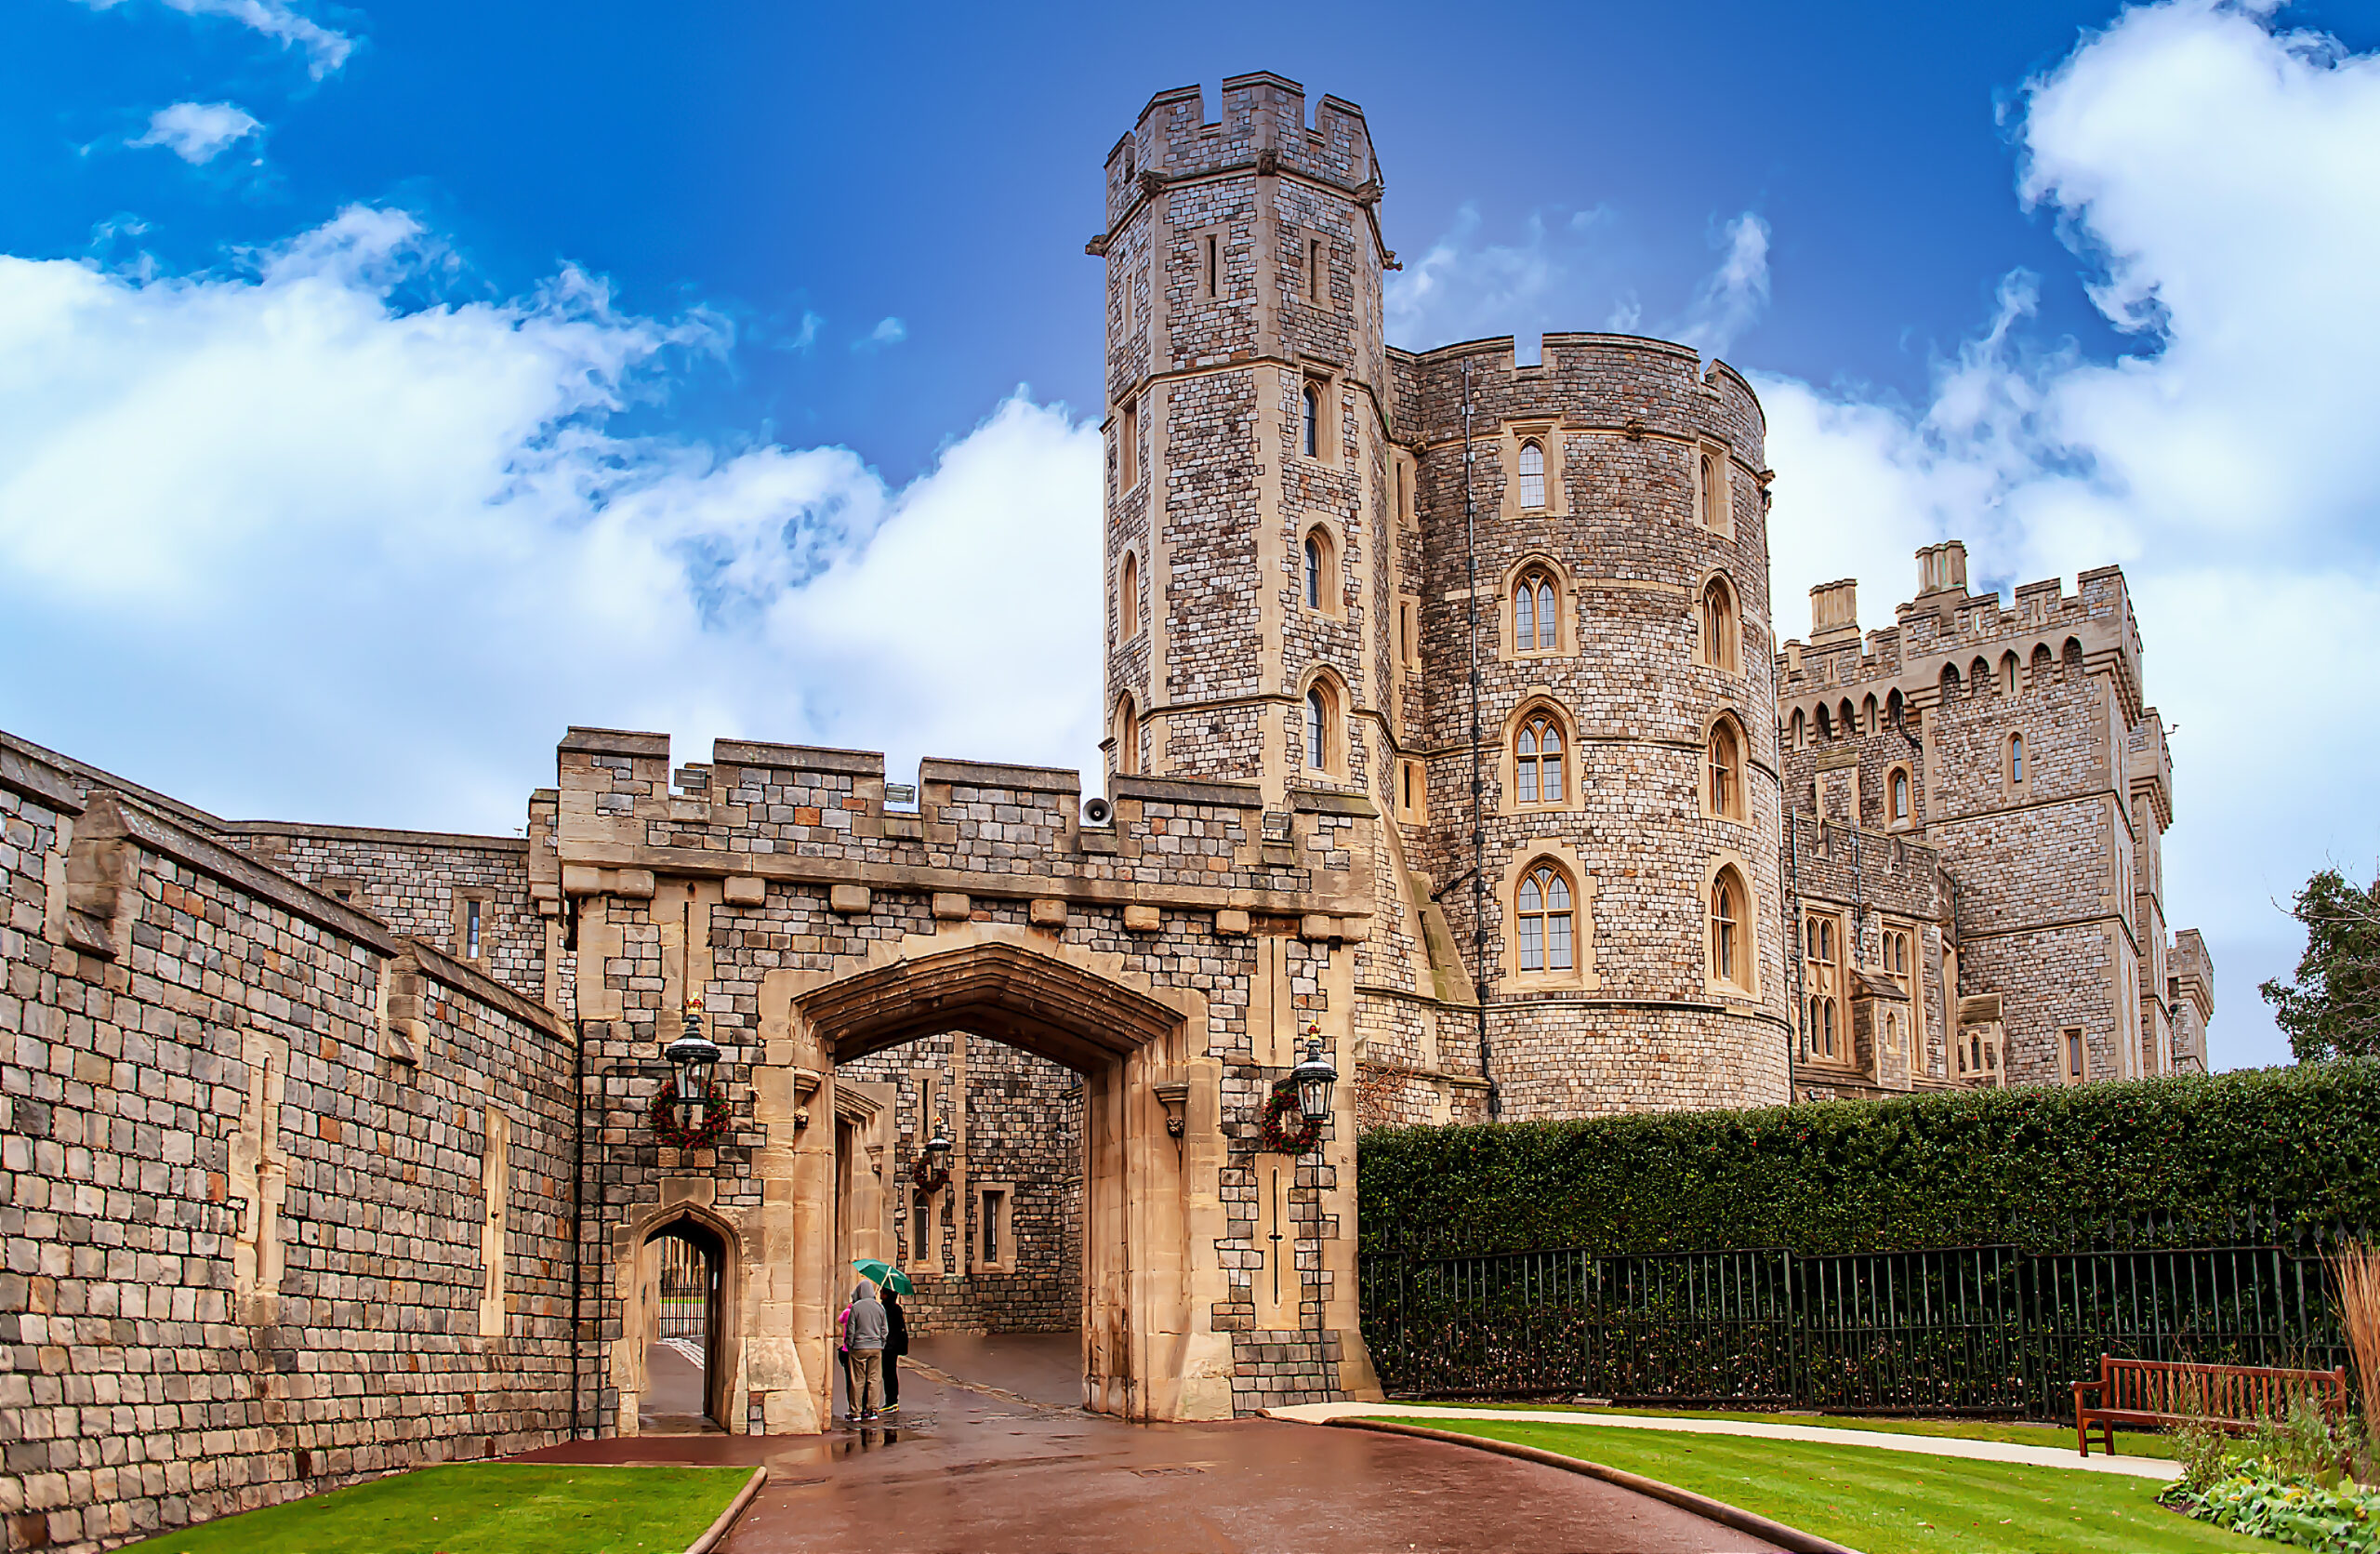 WINDSOR, ENGLAND – December 31 , 2014: Architectural fragments of Medieval Windsor Castle. Windsor Castle is a royal residence at Windsor in the English county of Berkshire.